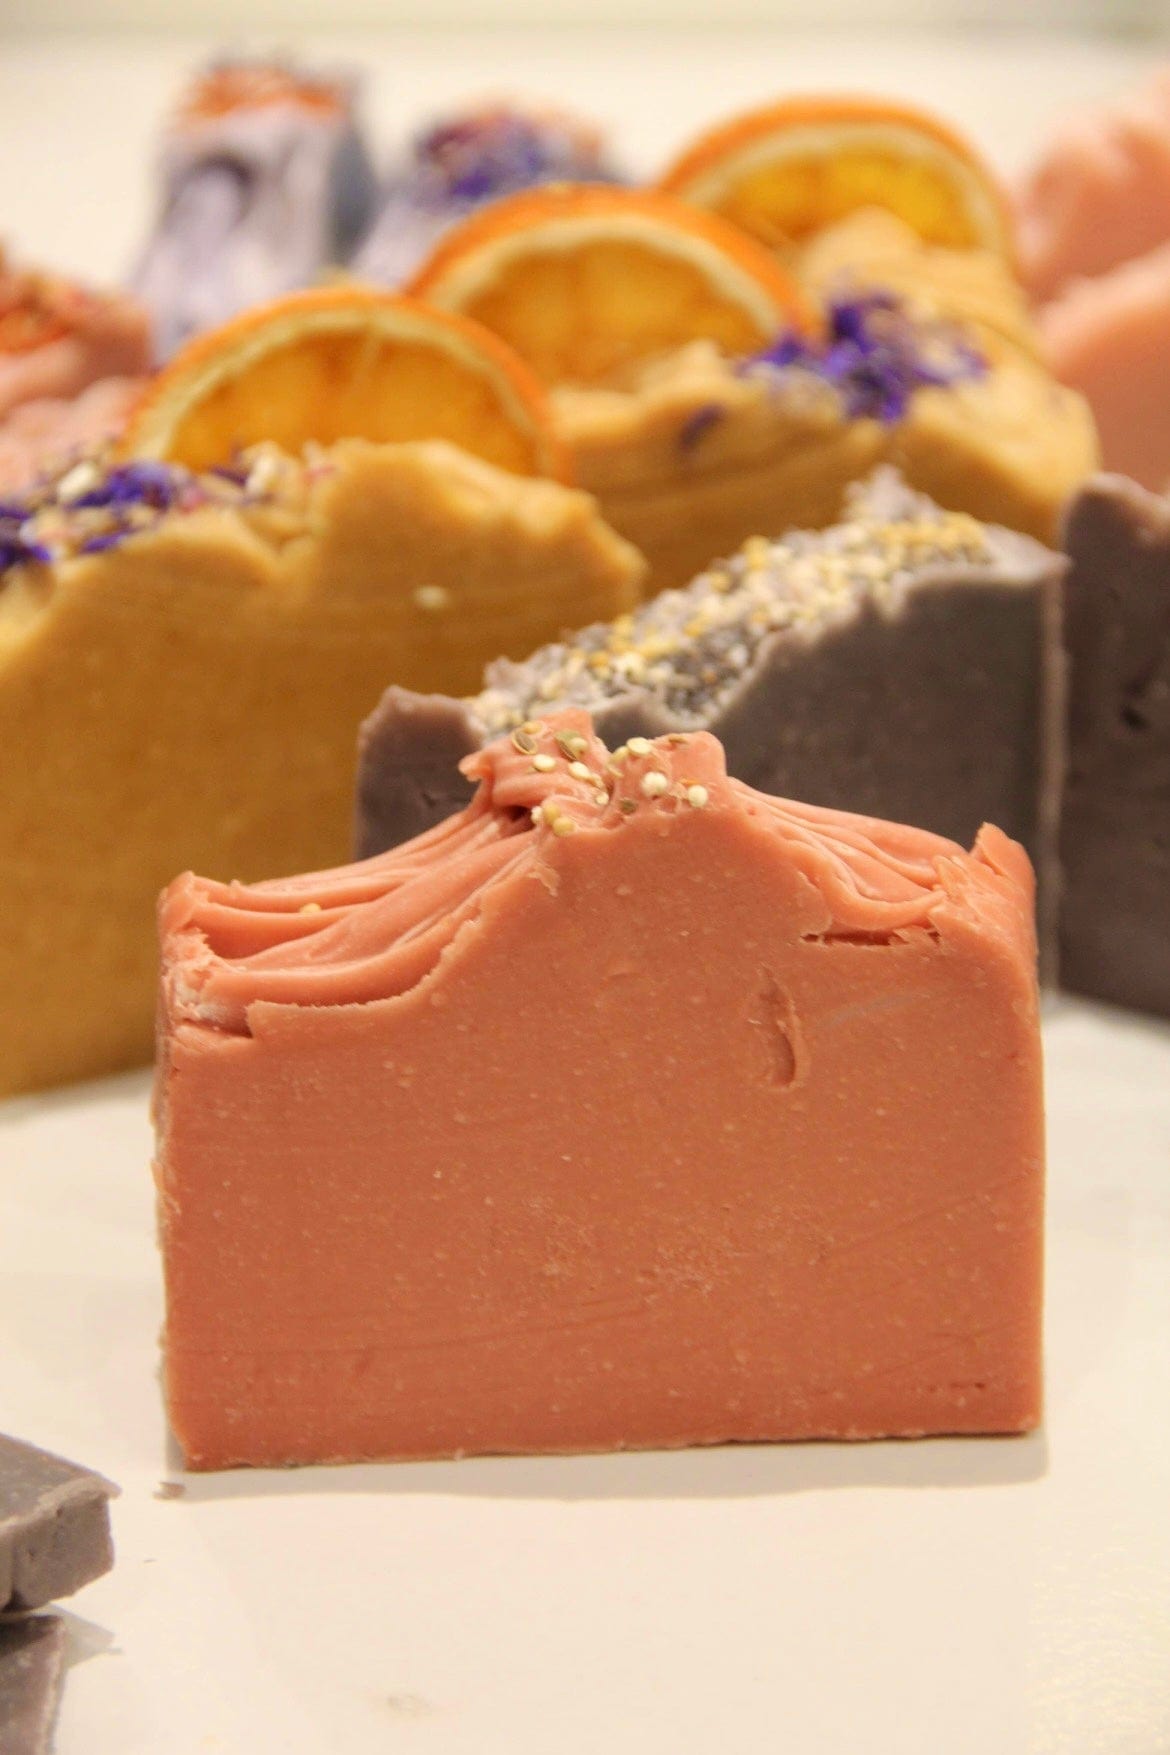 Mother's Day Soap Making Class May 12th 2:00 pm